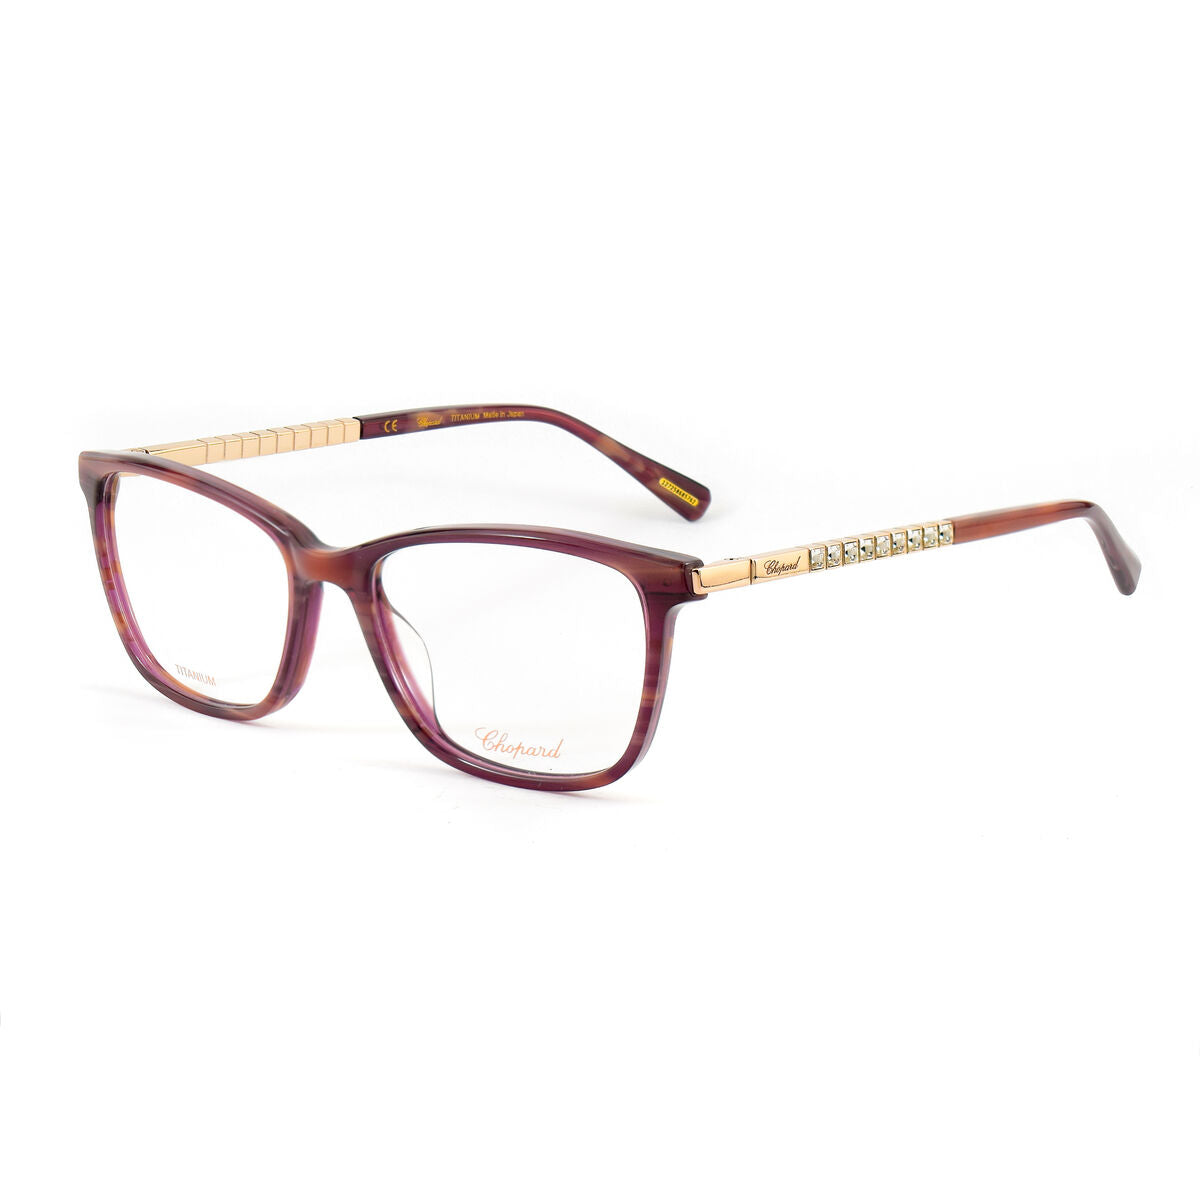 Ladies' Spectacle frame Chopard VCH275S540ACL ø 54 mm